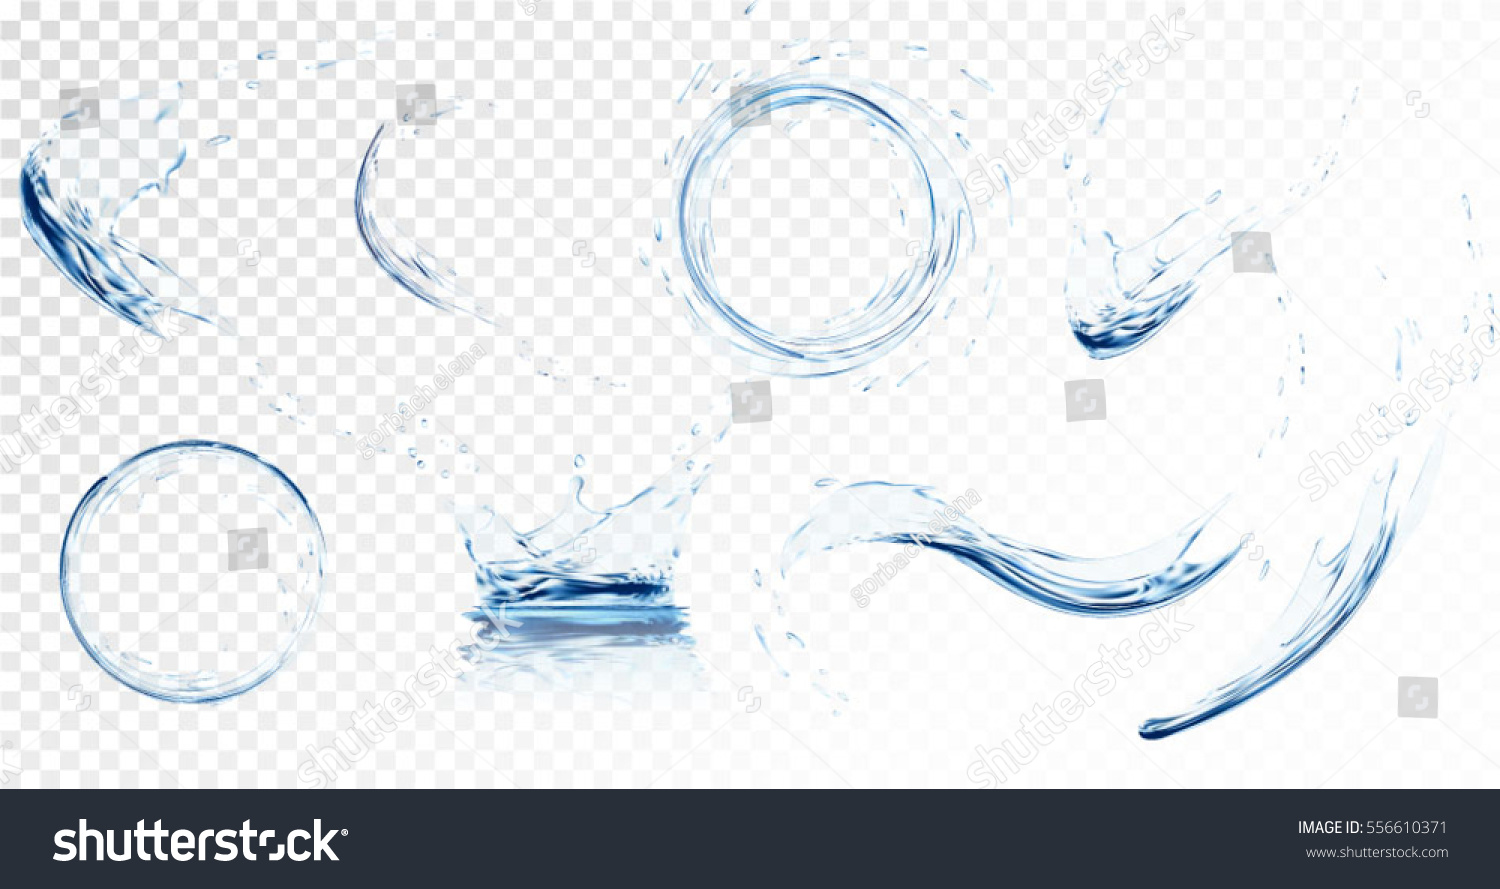 Set of transparent water splashes, water drops and crown from falling into the water in light blue colors, isolated on transparent background. Transparency only in vector file